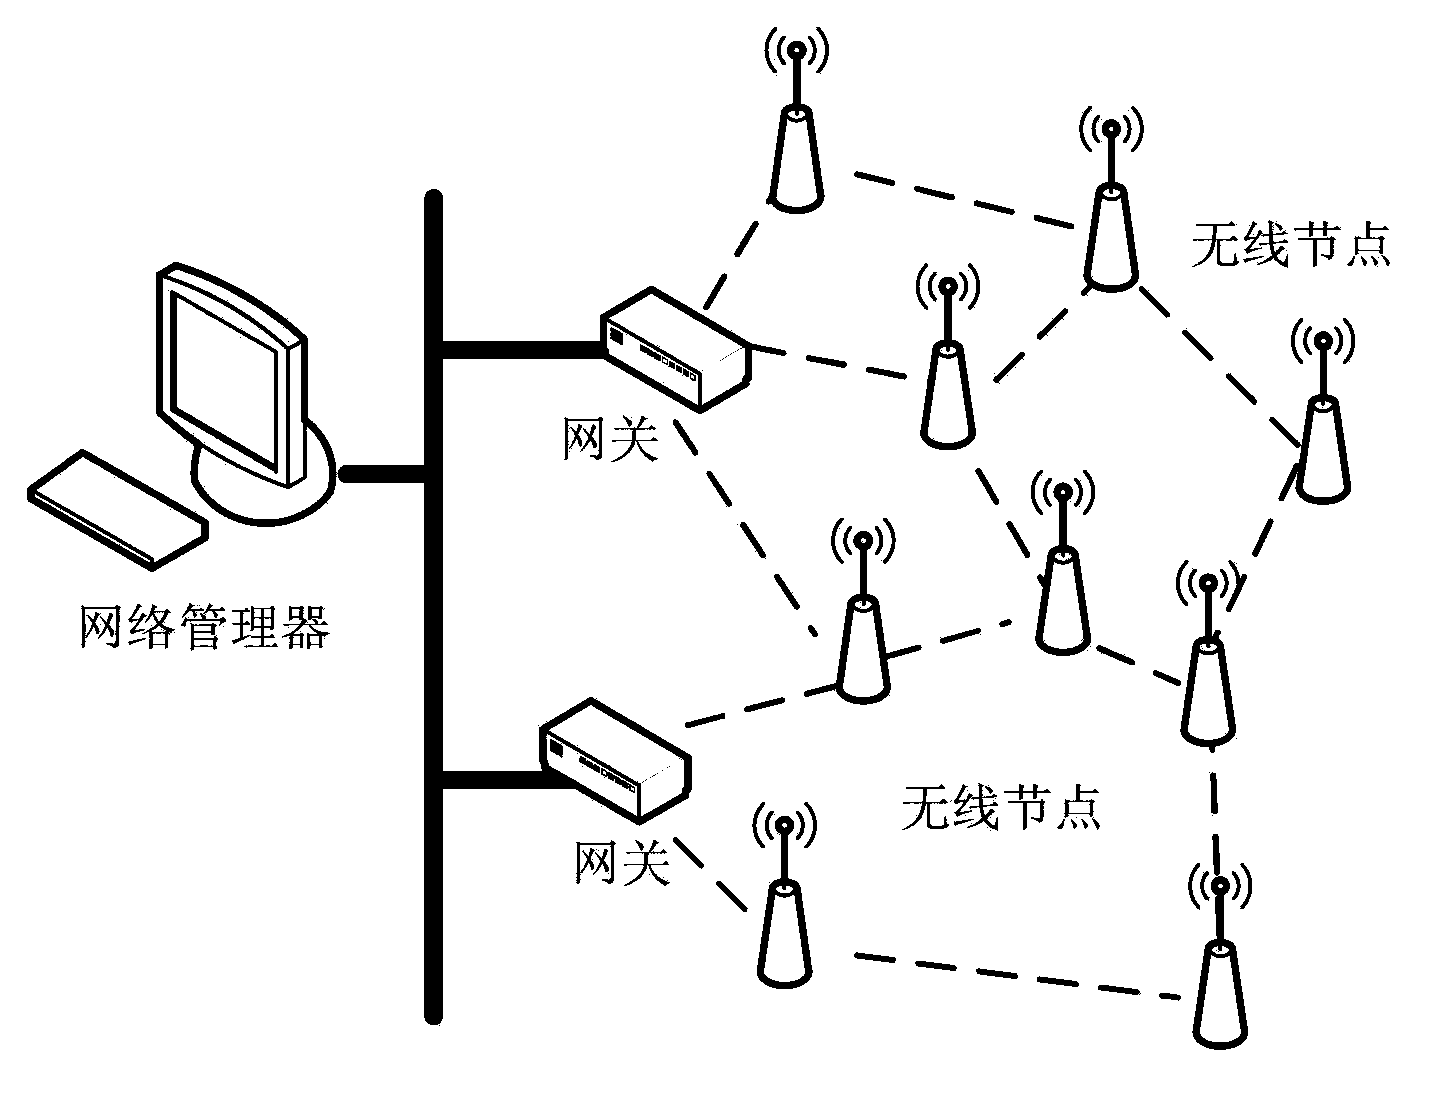 Load balancing method suitable for WIA-PA network